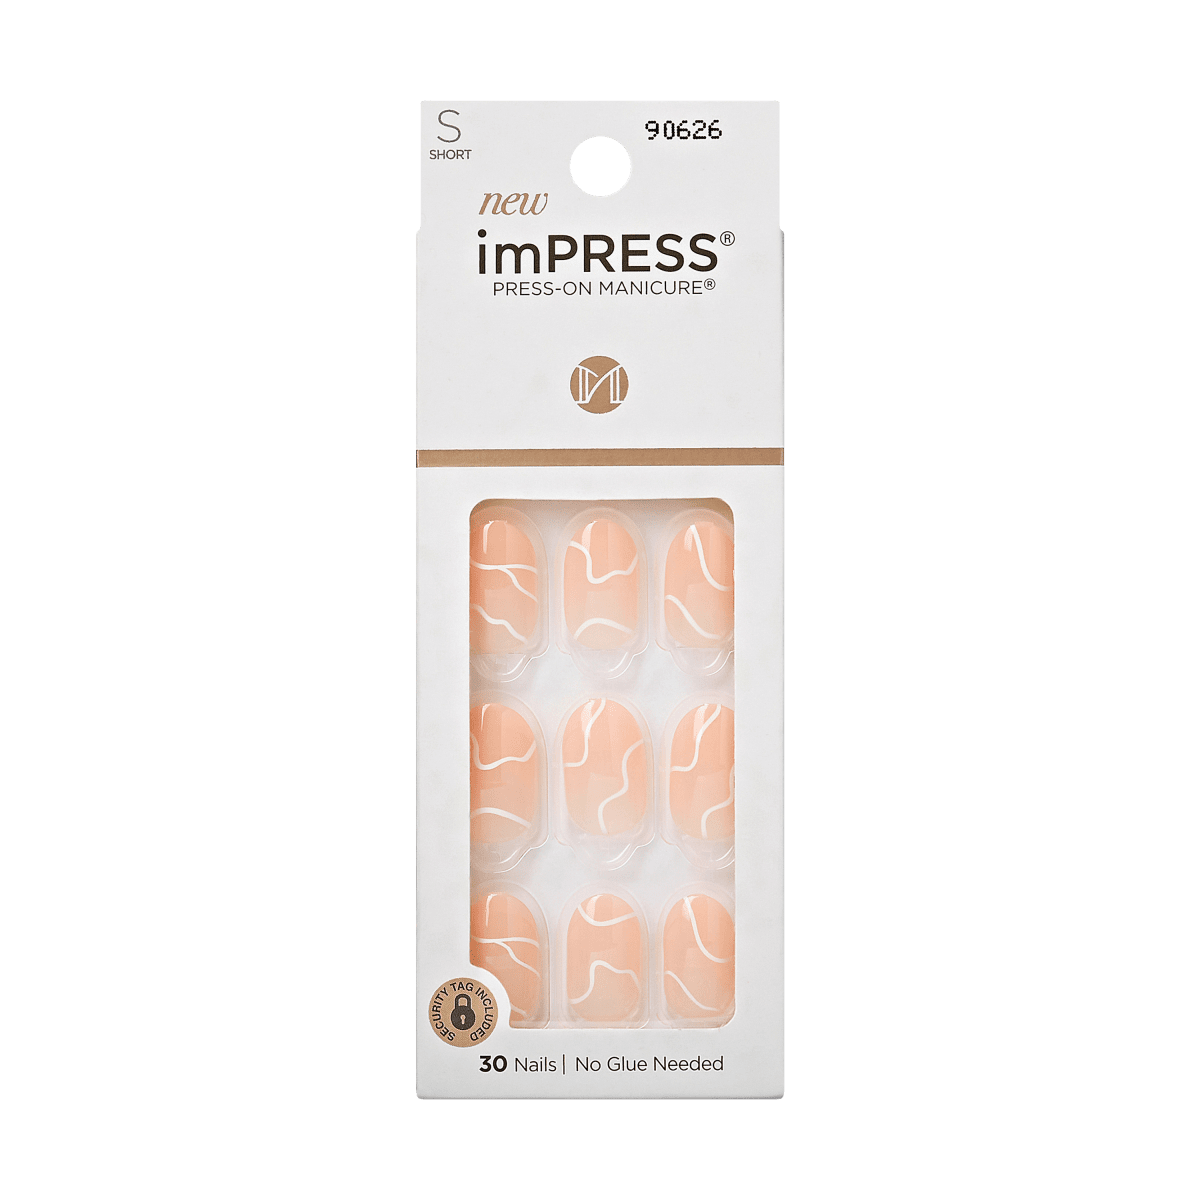 imPRESS Press-On Manicure - Letter To You